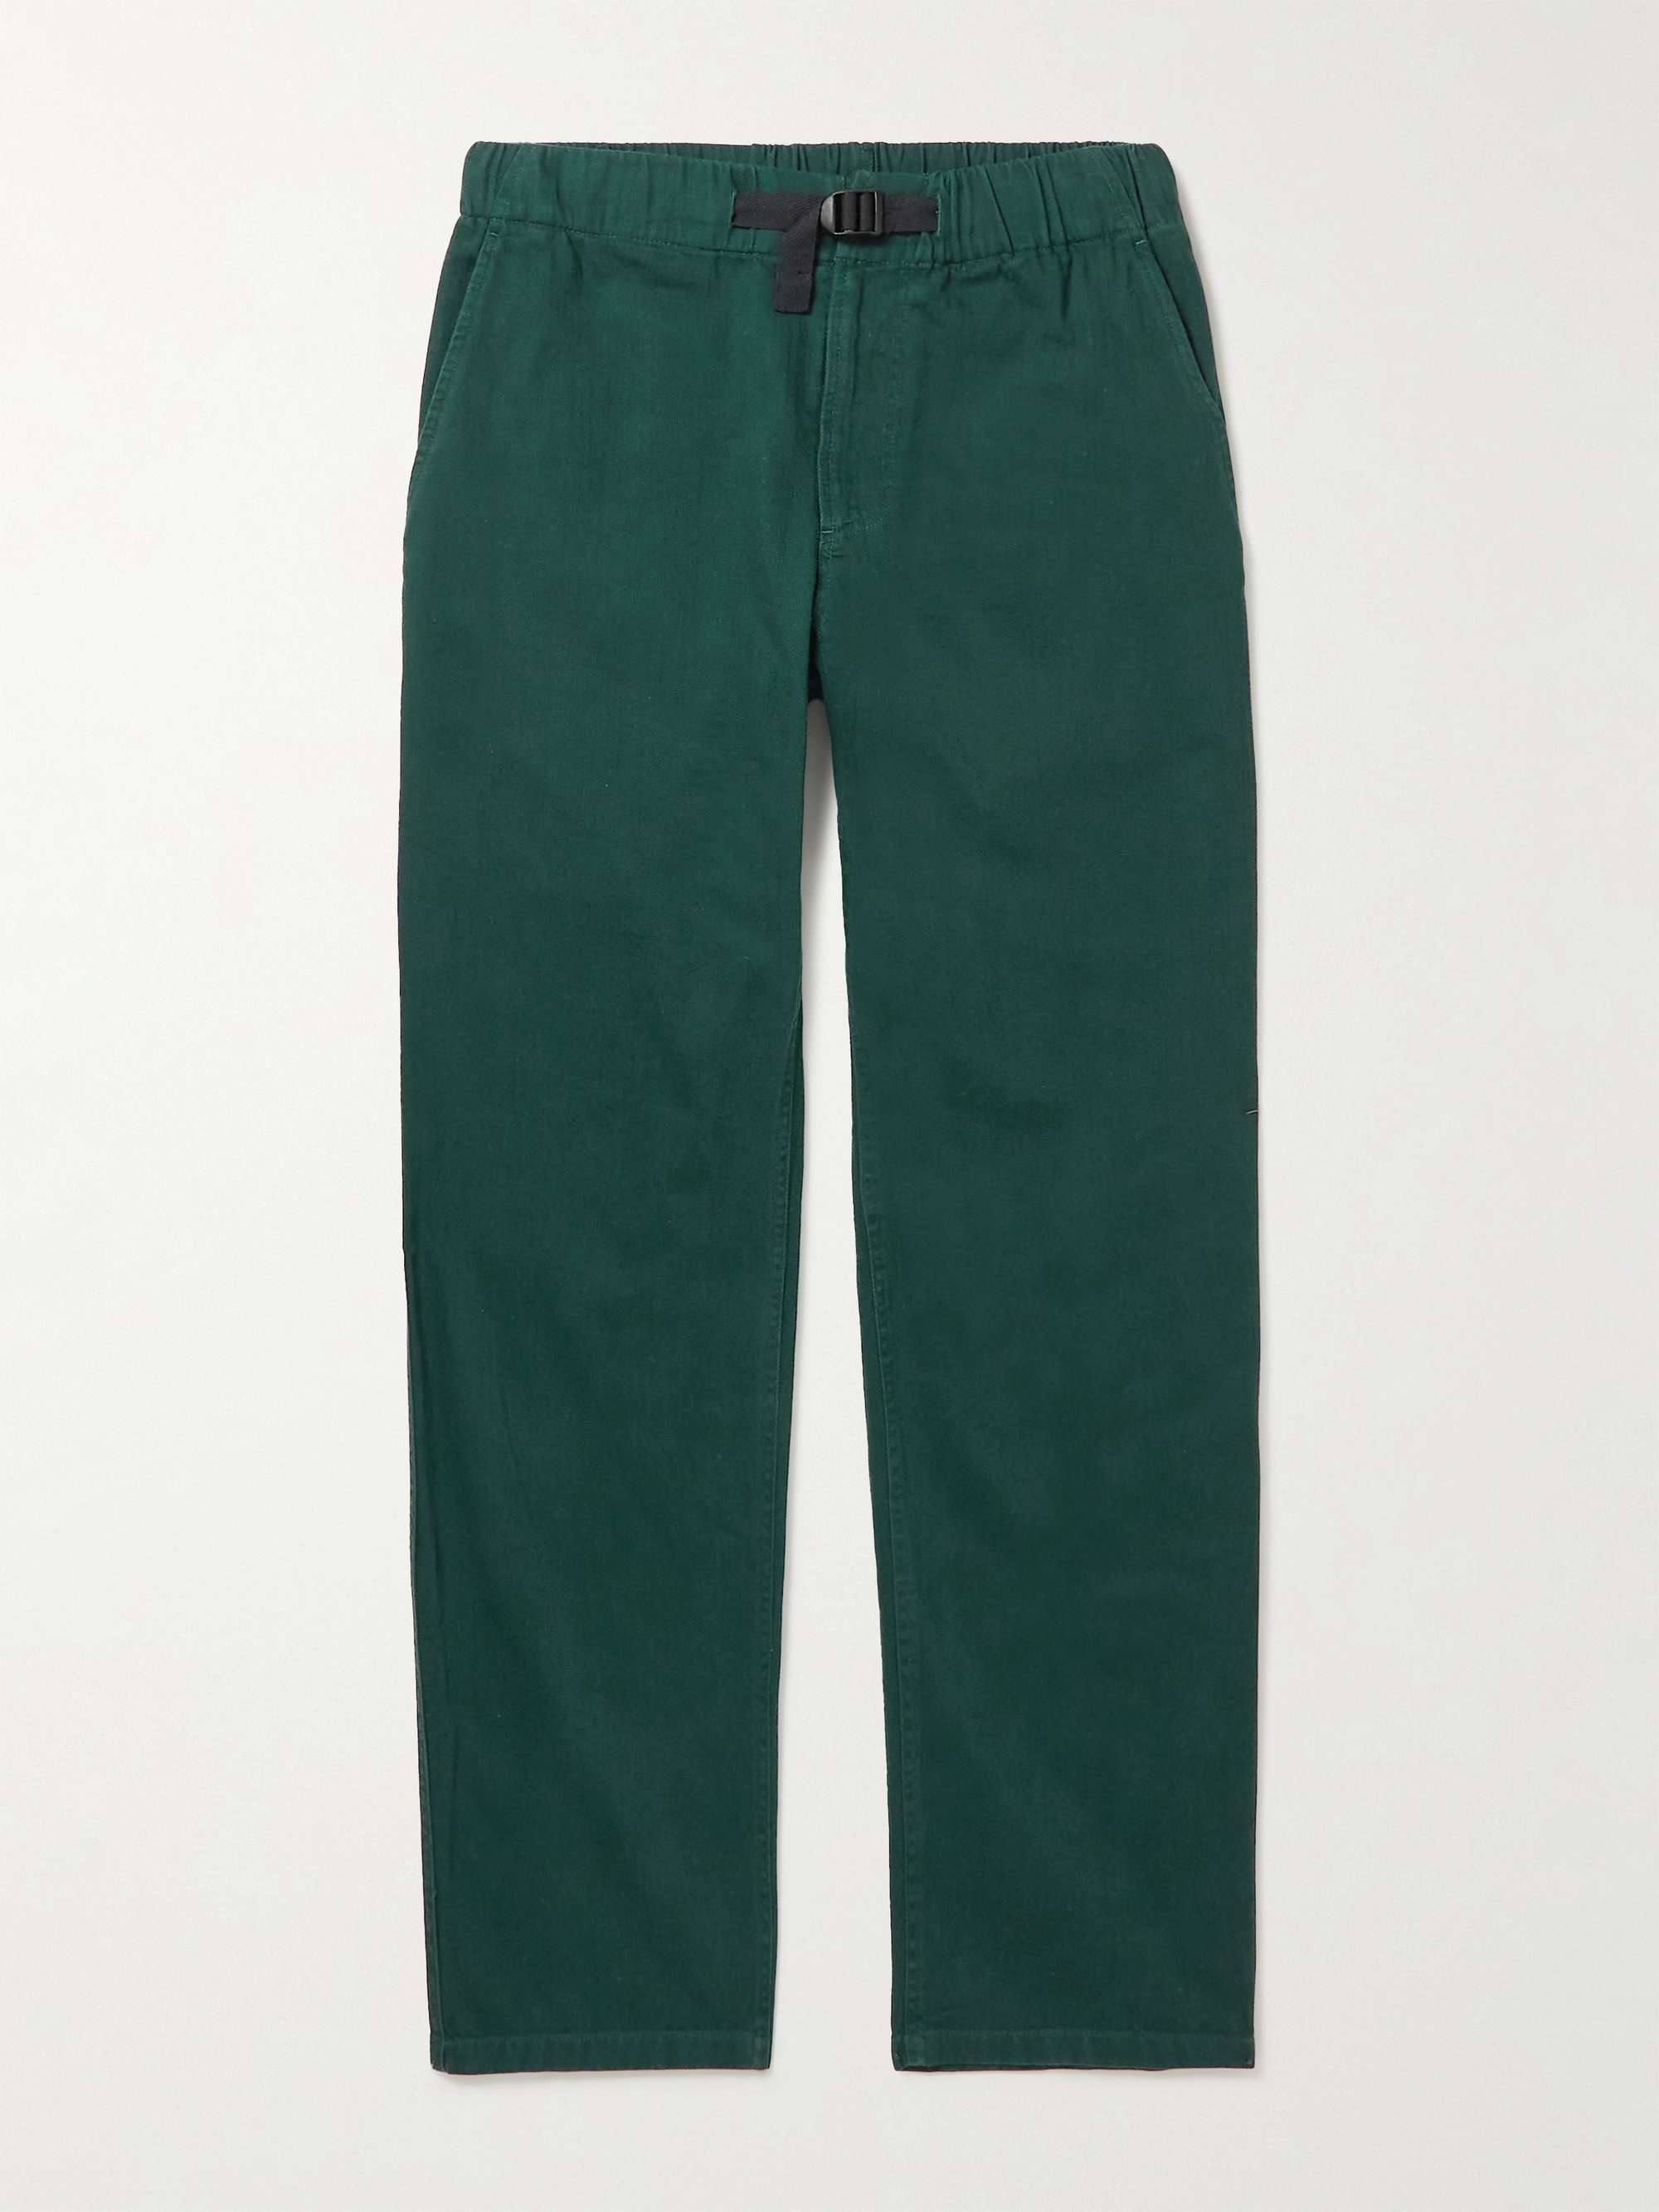 A.P.C. Youri Straight-Leg Belted Cotton Trousers